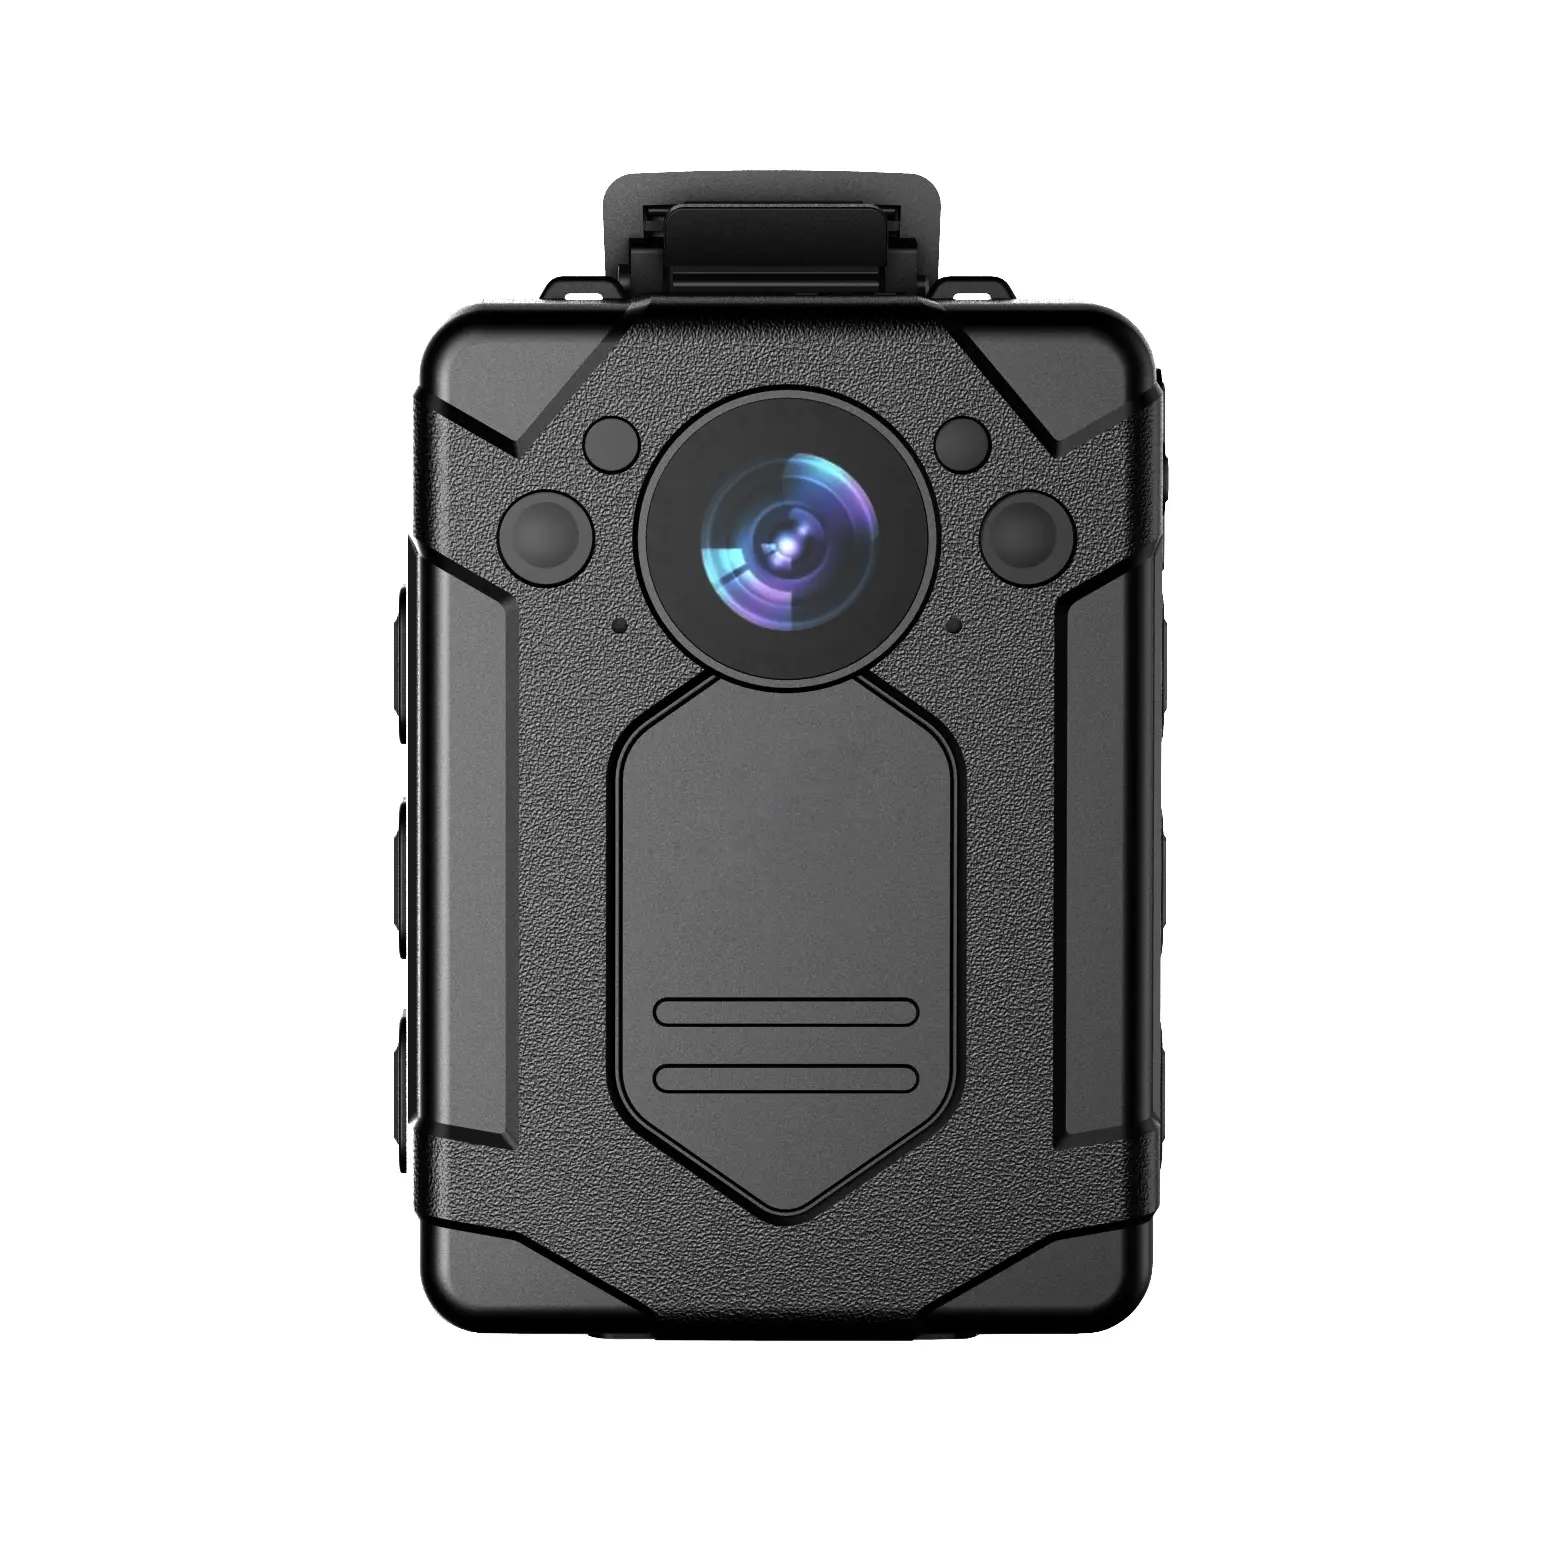 High Definition network camera Removable Battery 1700mAH Night Vision IR Detection Body Camera